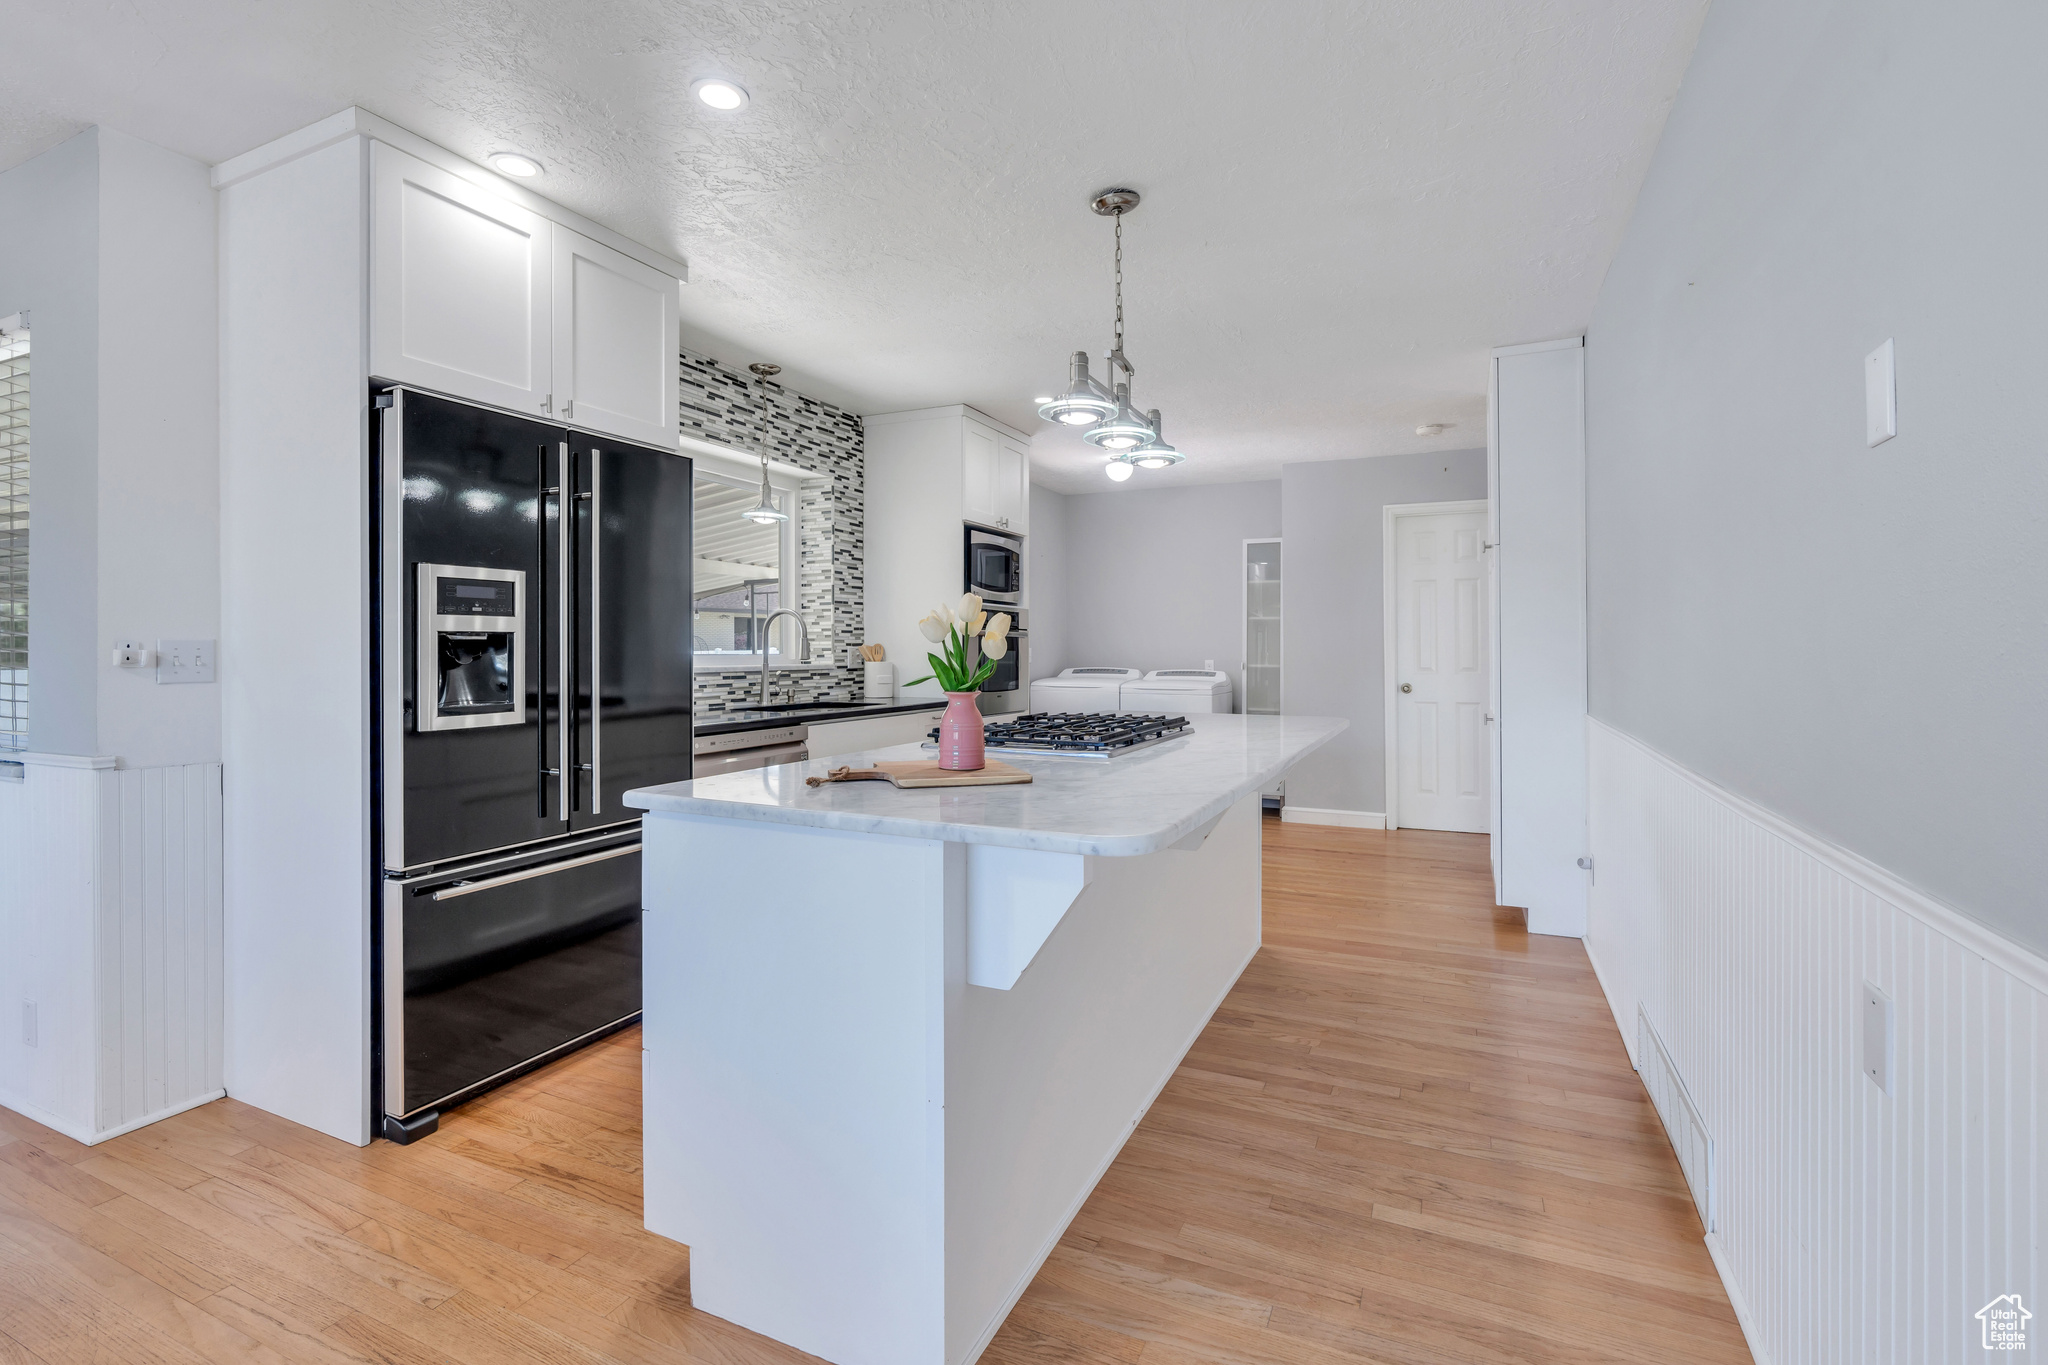 Kitchen featuring white cabinets, light hardwood / wood-style flooring, stainless steel appliances, and decorative light fixtures